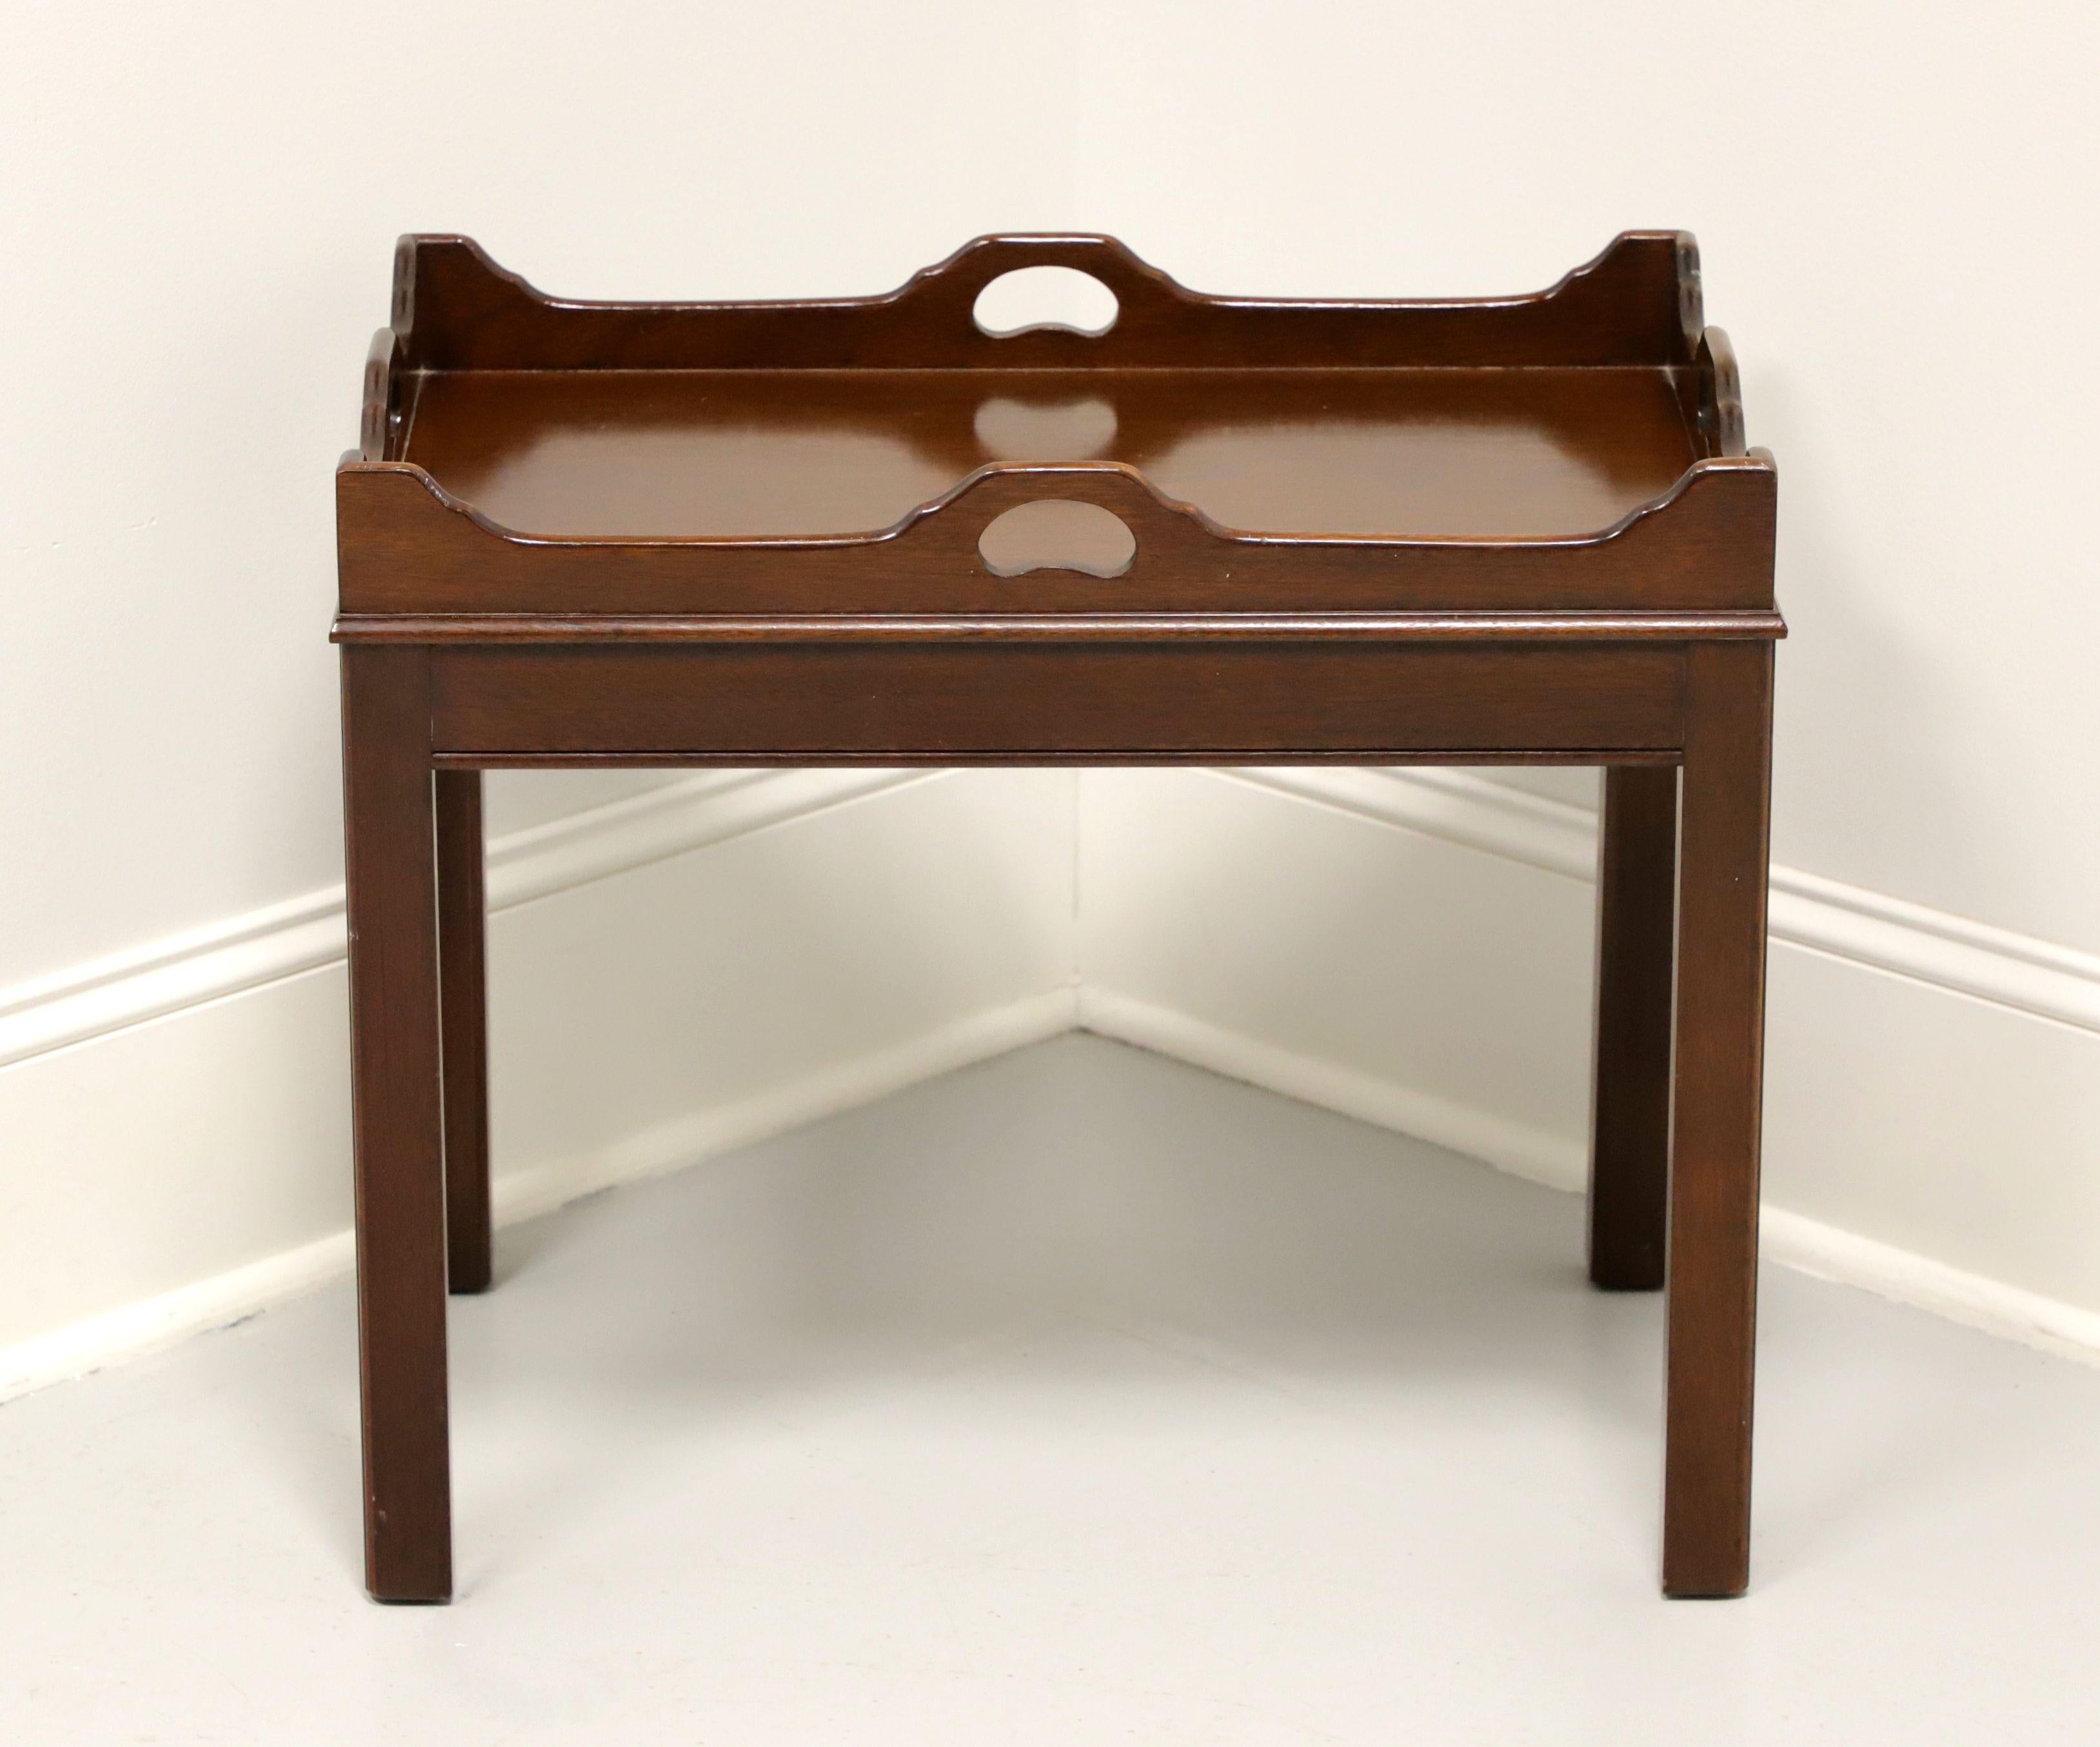 A Chippendale style tea table by Link-Taylor, from their Heirloom Gallery. Solid mahogany with a butlers tray like top with carved open handles, two slide out trays with brass pulls and straight legs. Made in Lexington, North Carolina, USA, in the